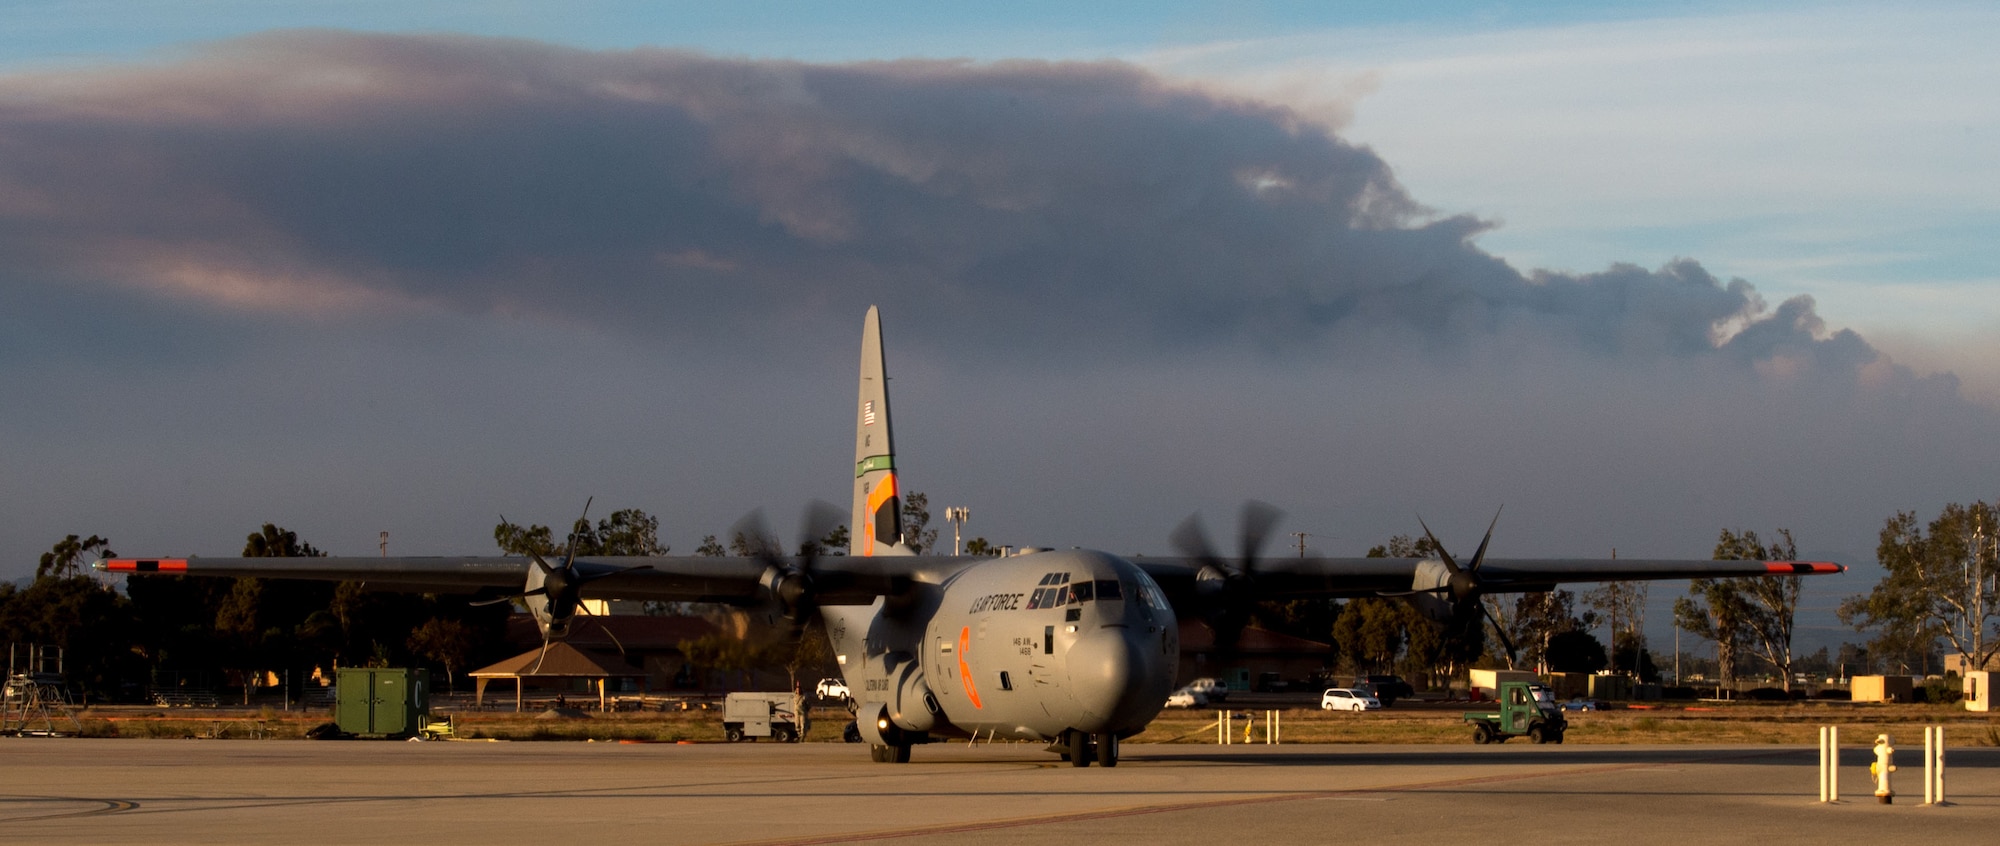 A C-130J of the 146th Airlift Wing, which carries the Modular Airborne Fire Fighting System (MAFFS), taxis for takeoff after being reloaded with flame retardant chemicals at Channel Islands Air National Guard Base in Port Hueneme, California, Dec. 9, 2017. (U.S. Air Force photo by J.M. Eddins Jr.)